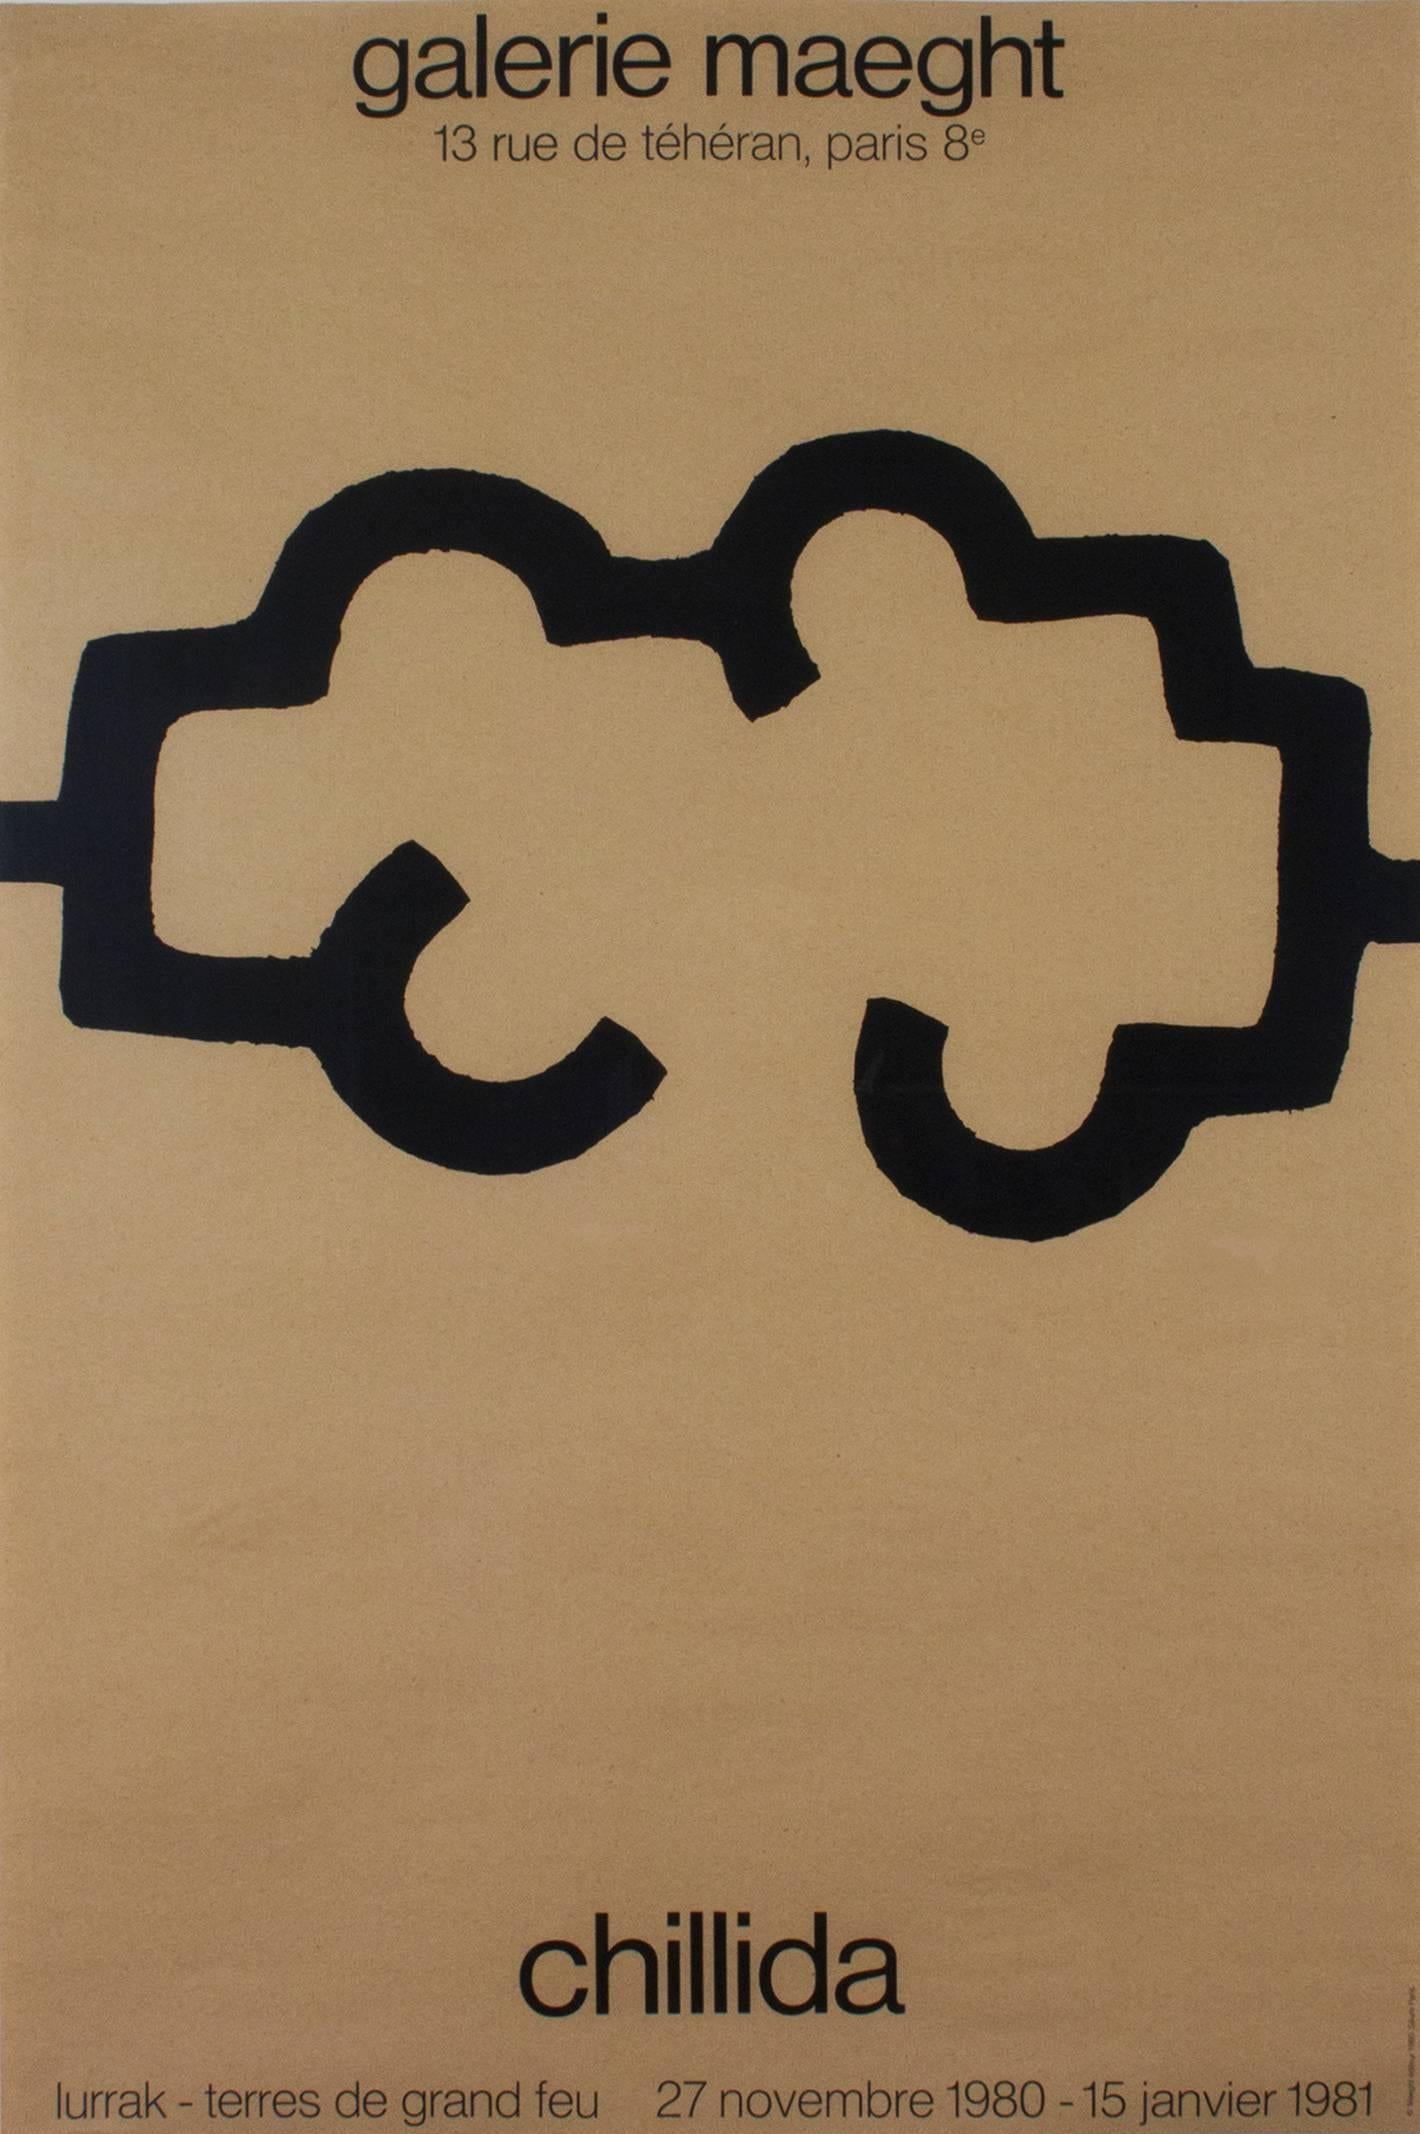 galerie maeght chillida poster